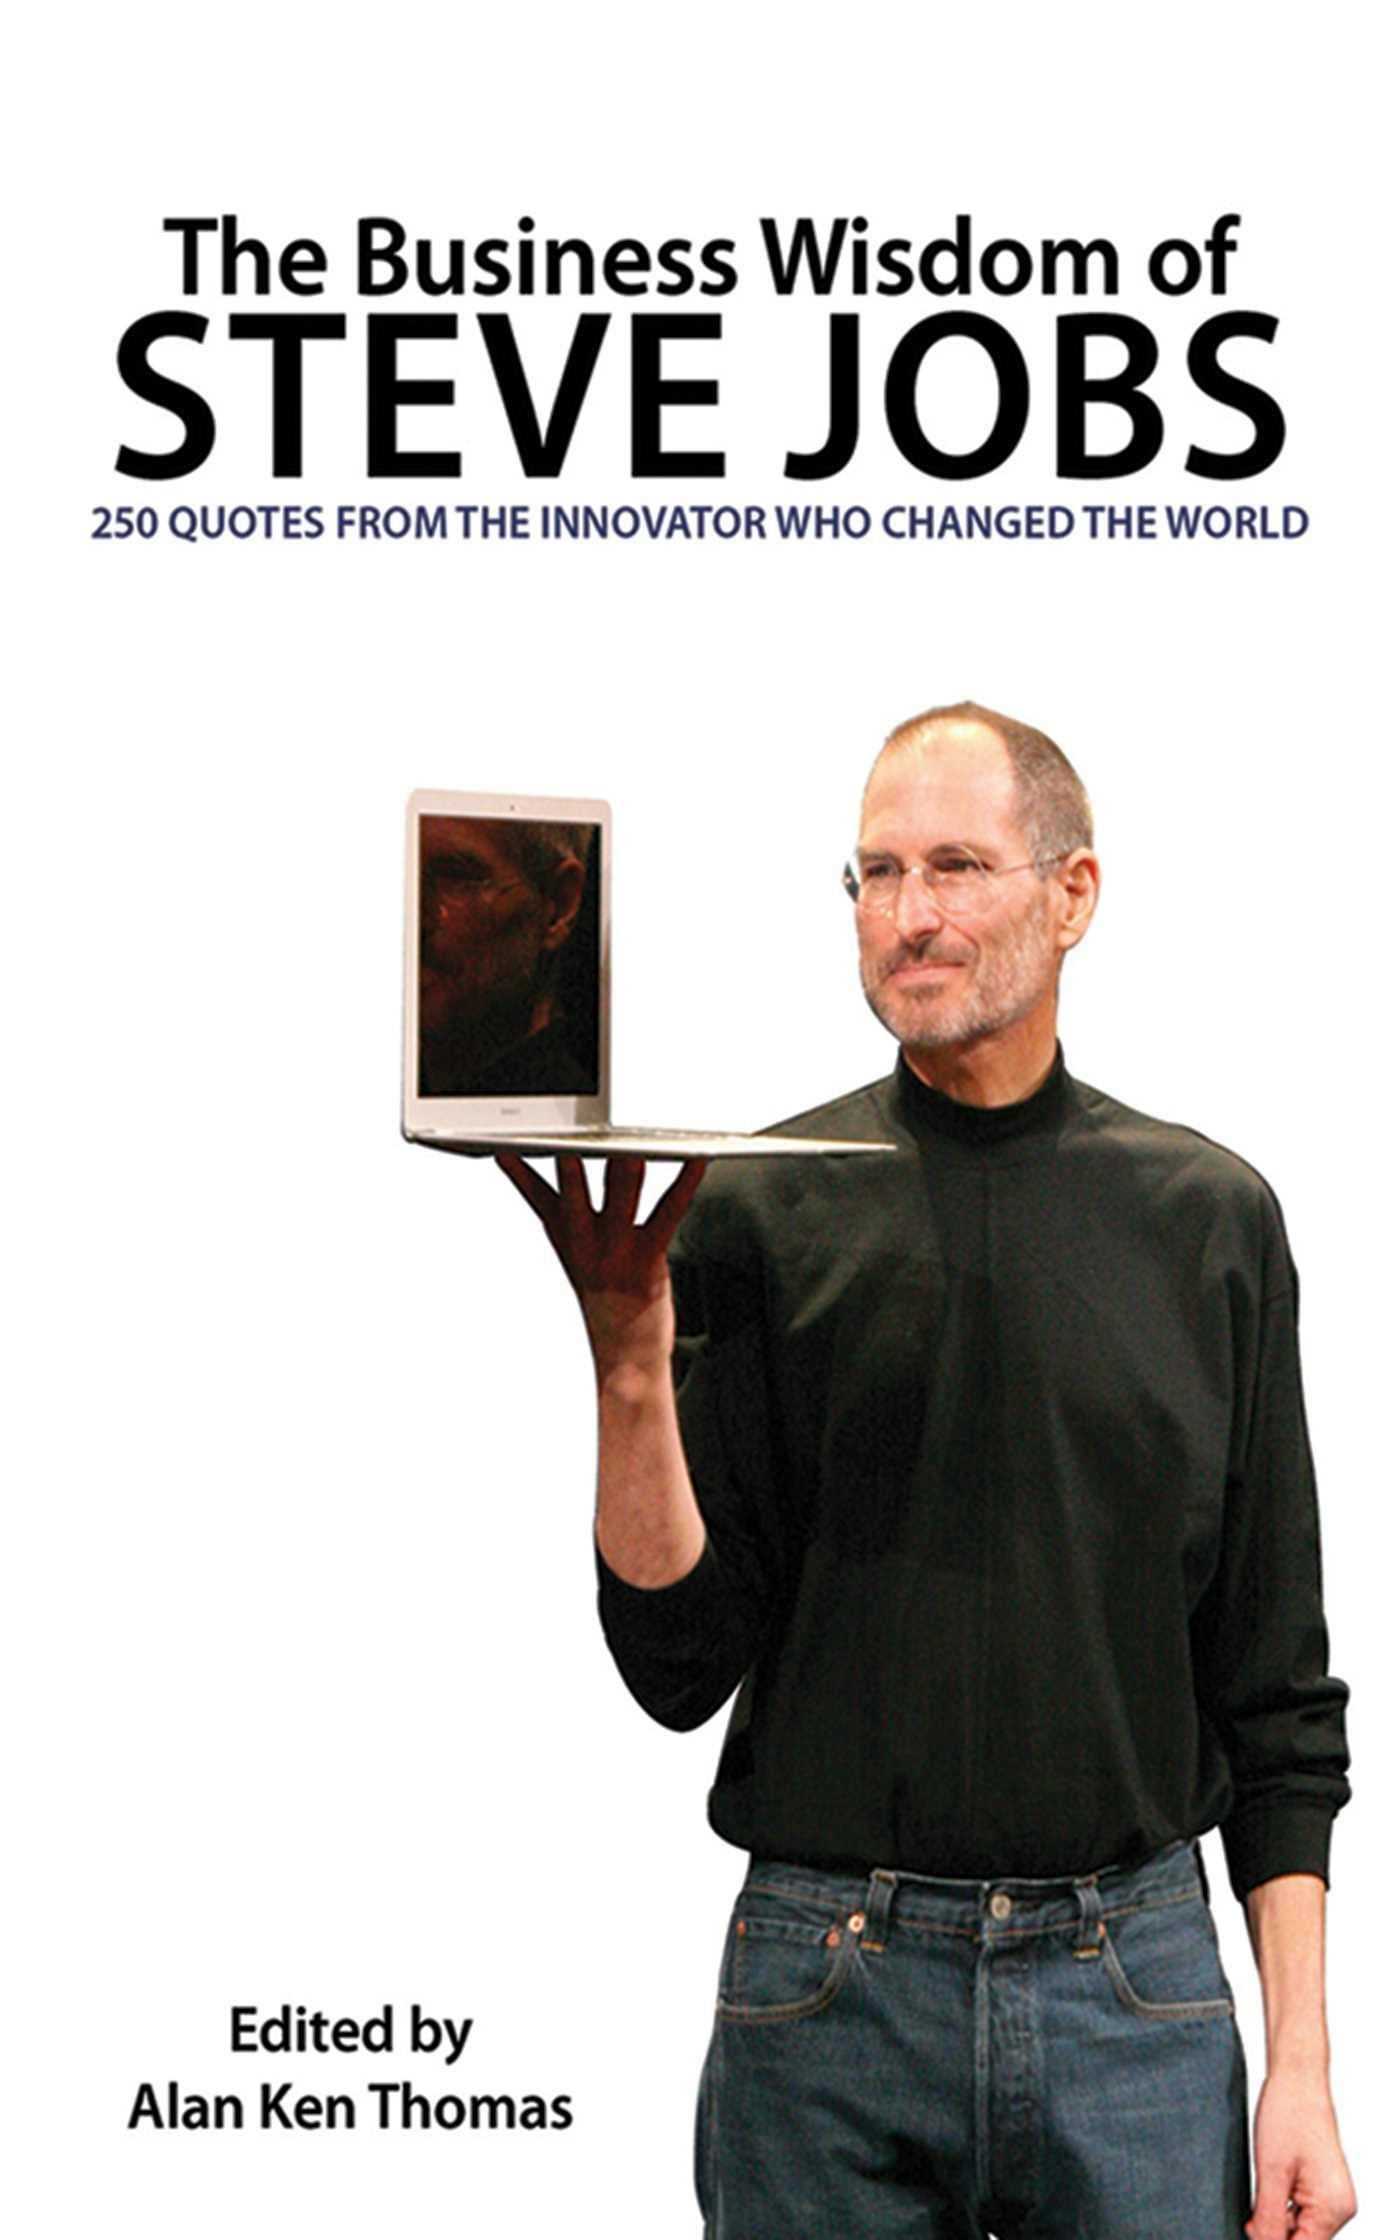 The Business Wisdom of Steve Jobs: 250 Quotes from the Innovator Who Changed the World - Alan Ken Thomas